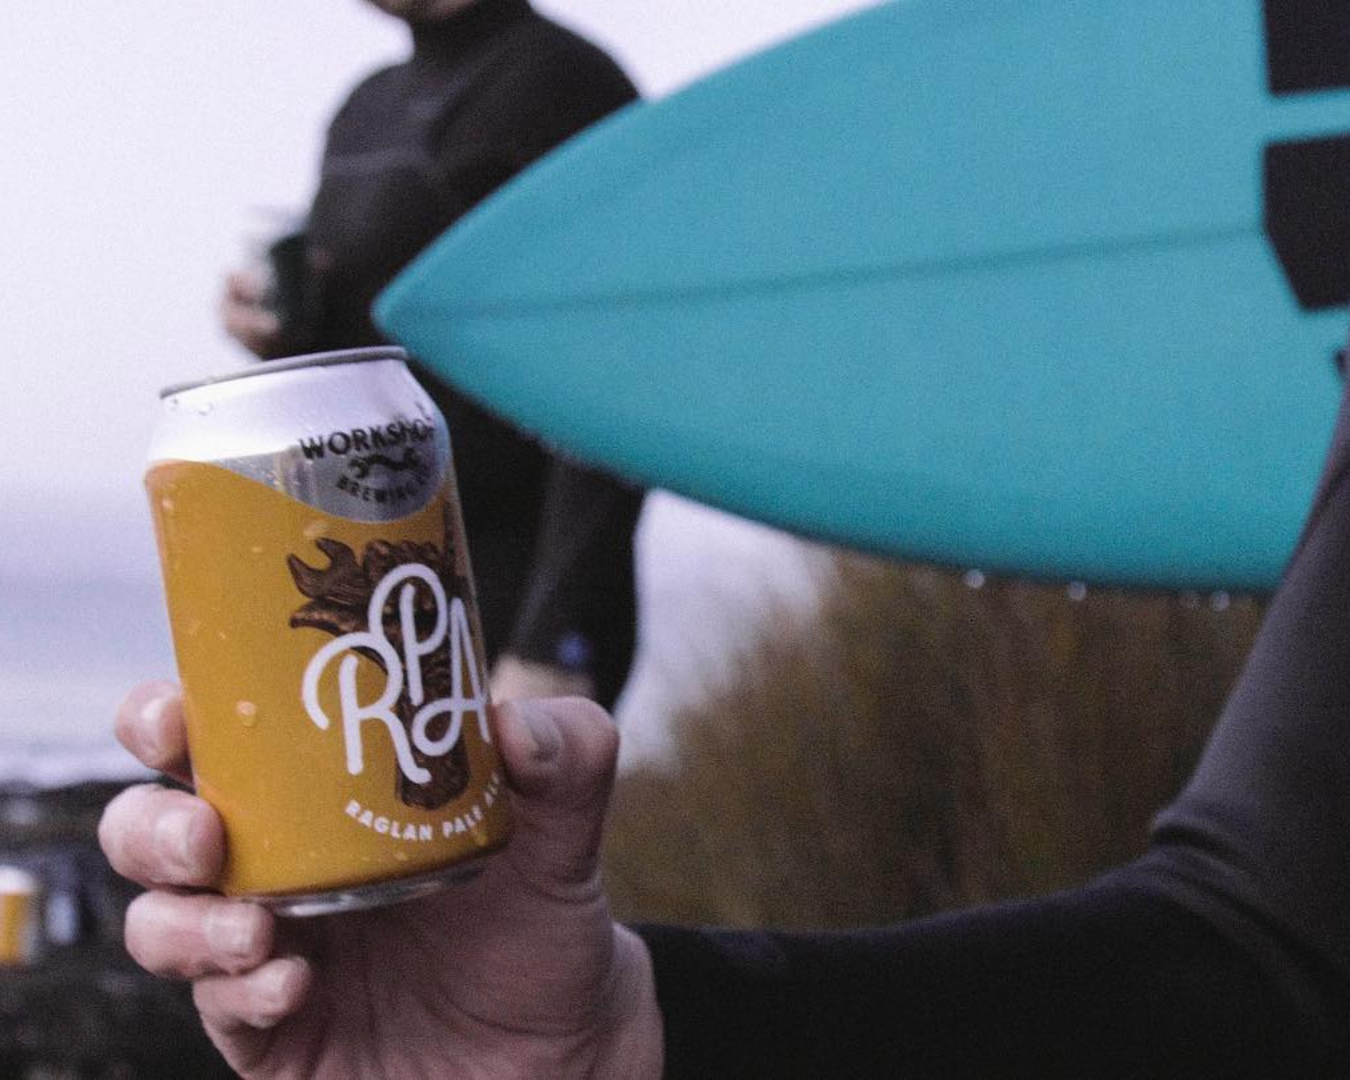 A surfer holding a can of Raglan Pale Ale